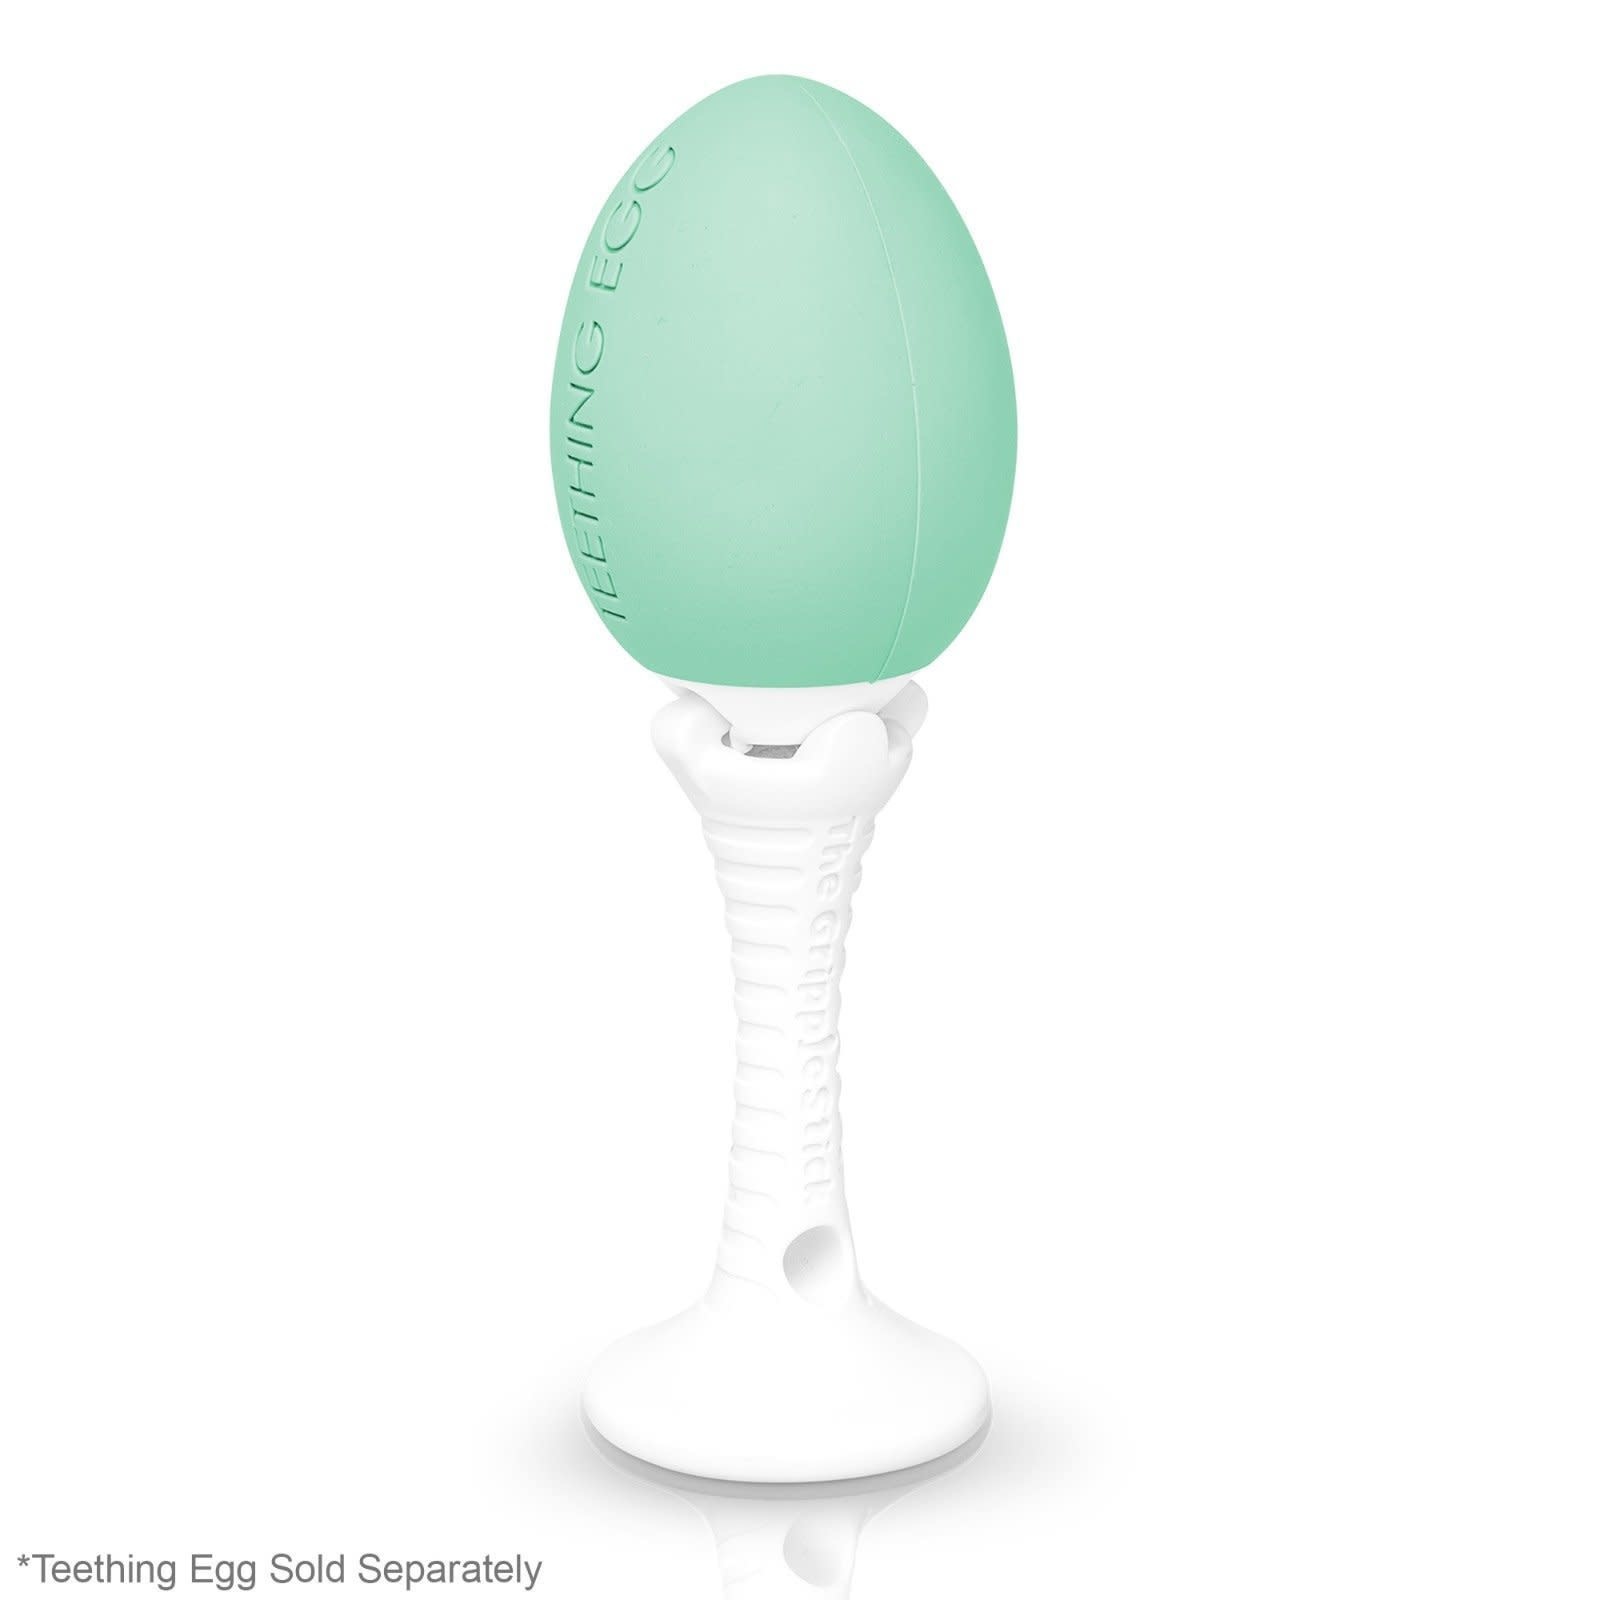 The Teething Egg The Grippie Stick